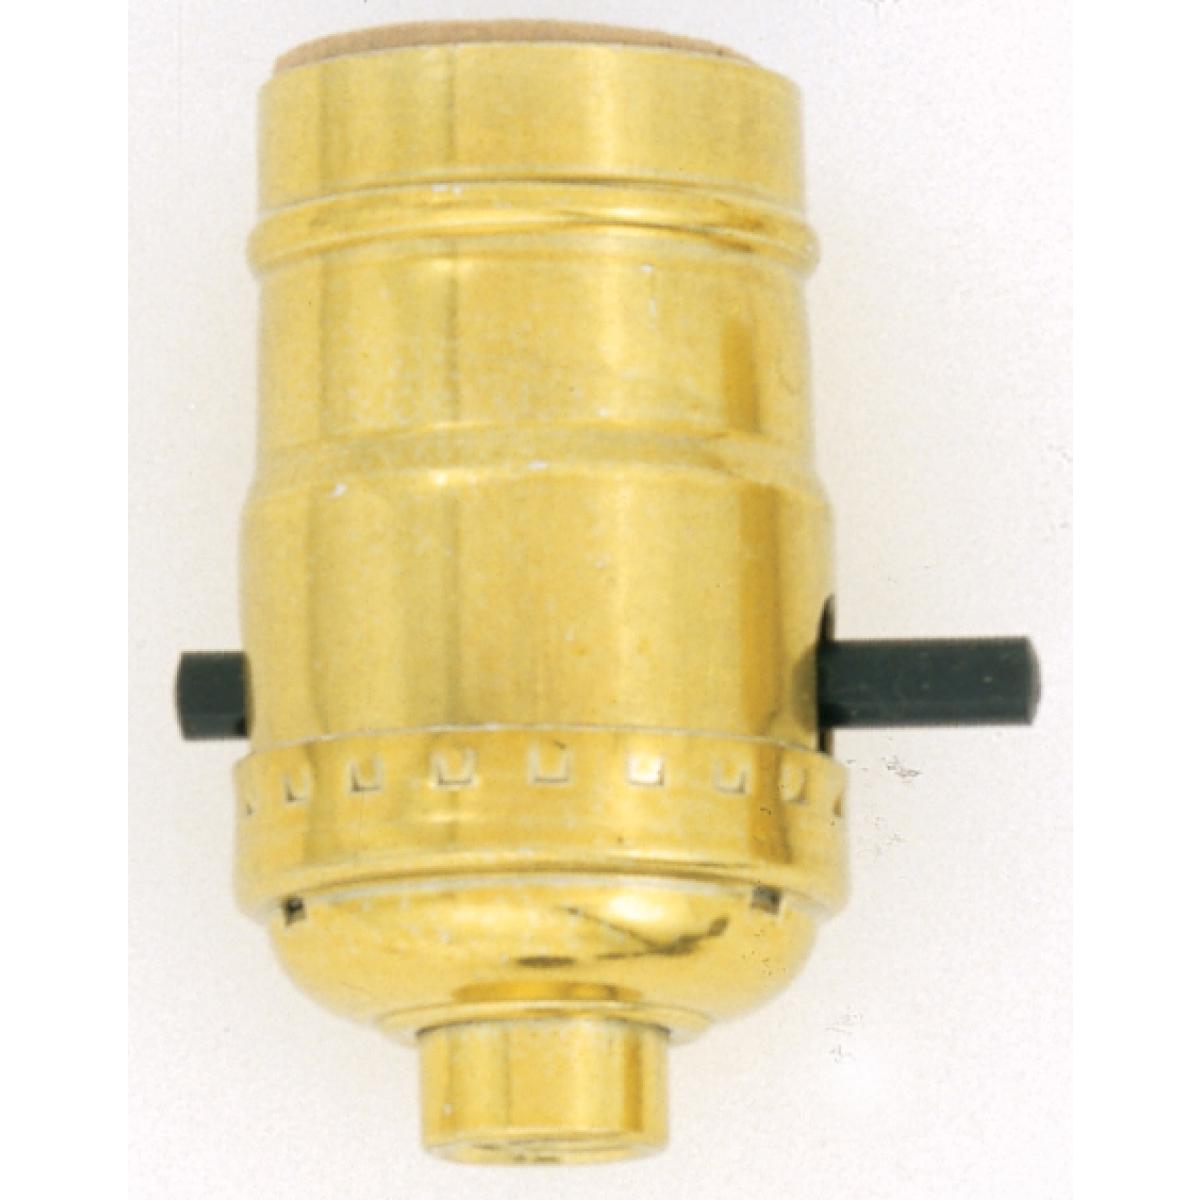 Satco S70-410 Standard Socket With Push-Thru Switch Brite Gilt Finish Carded